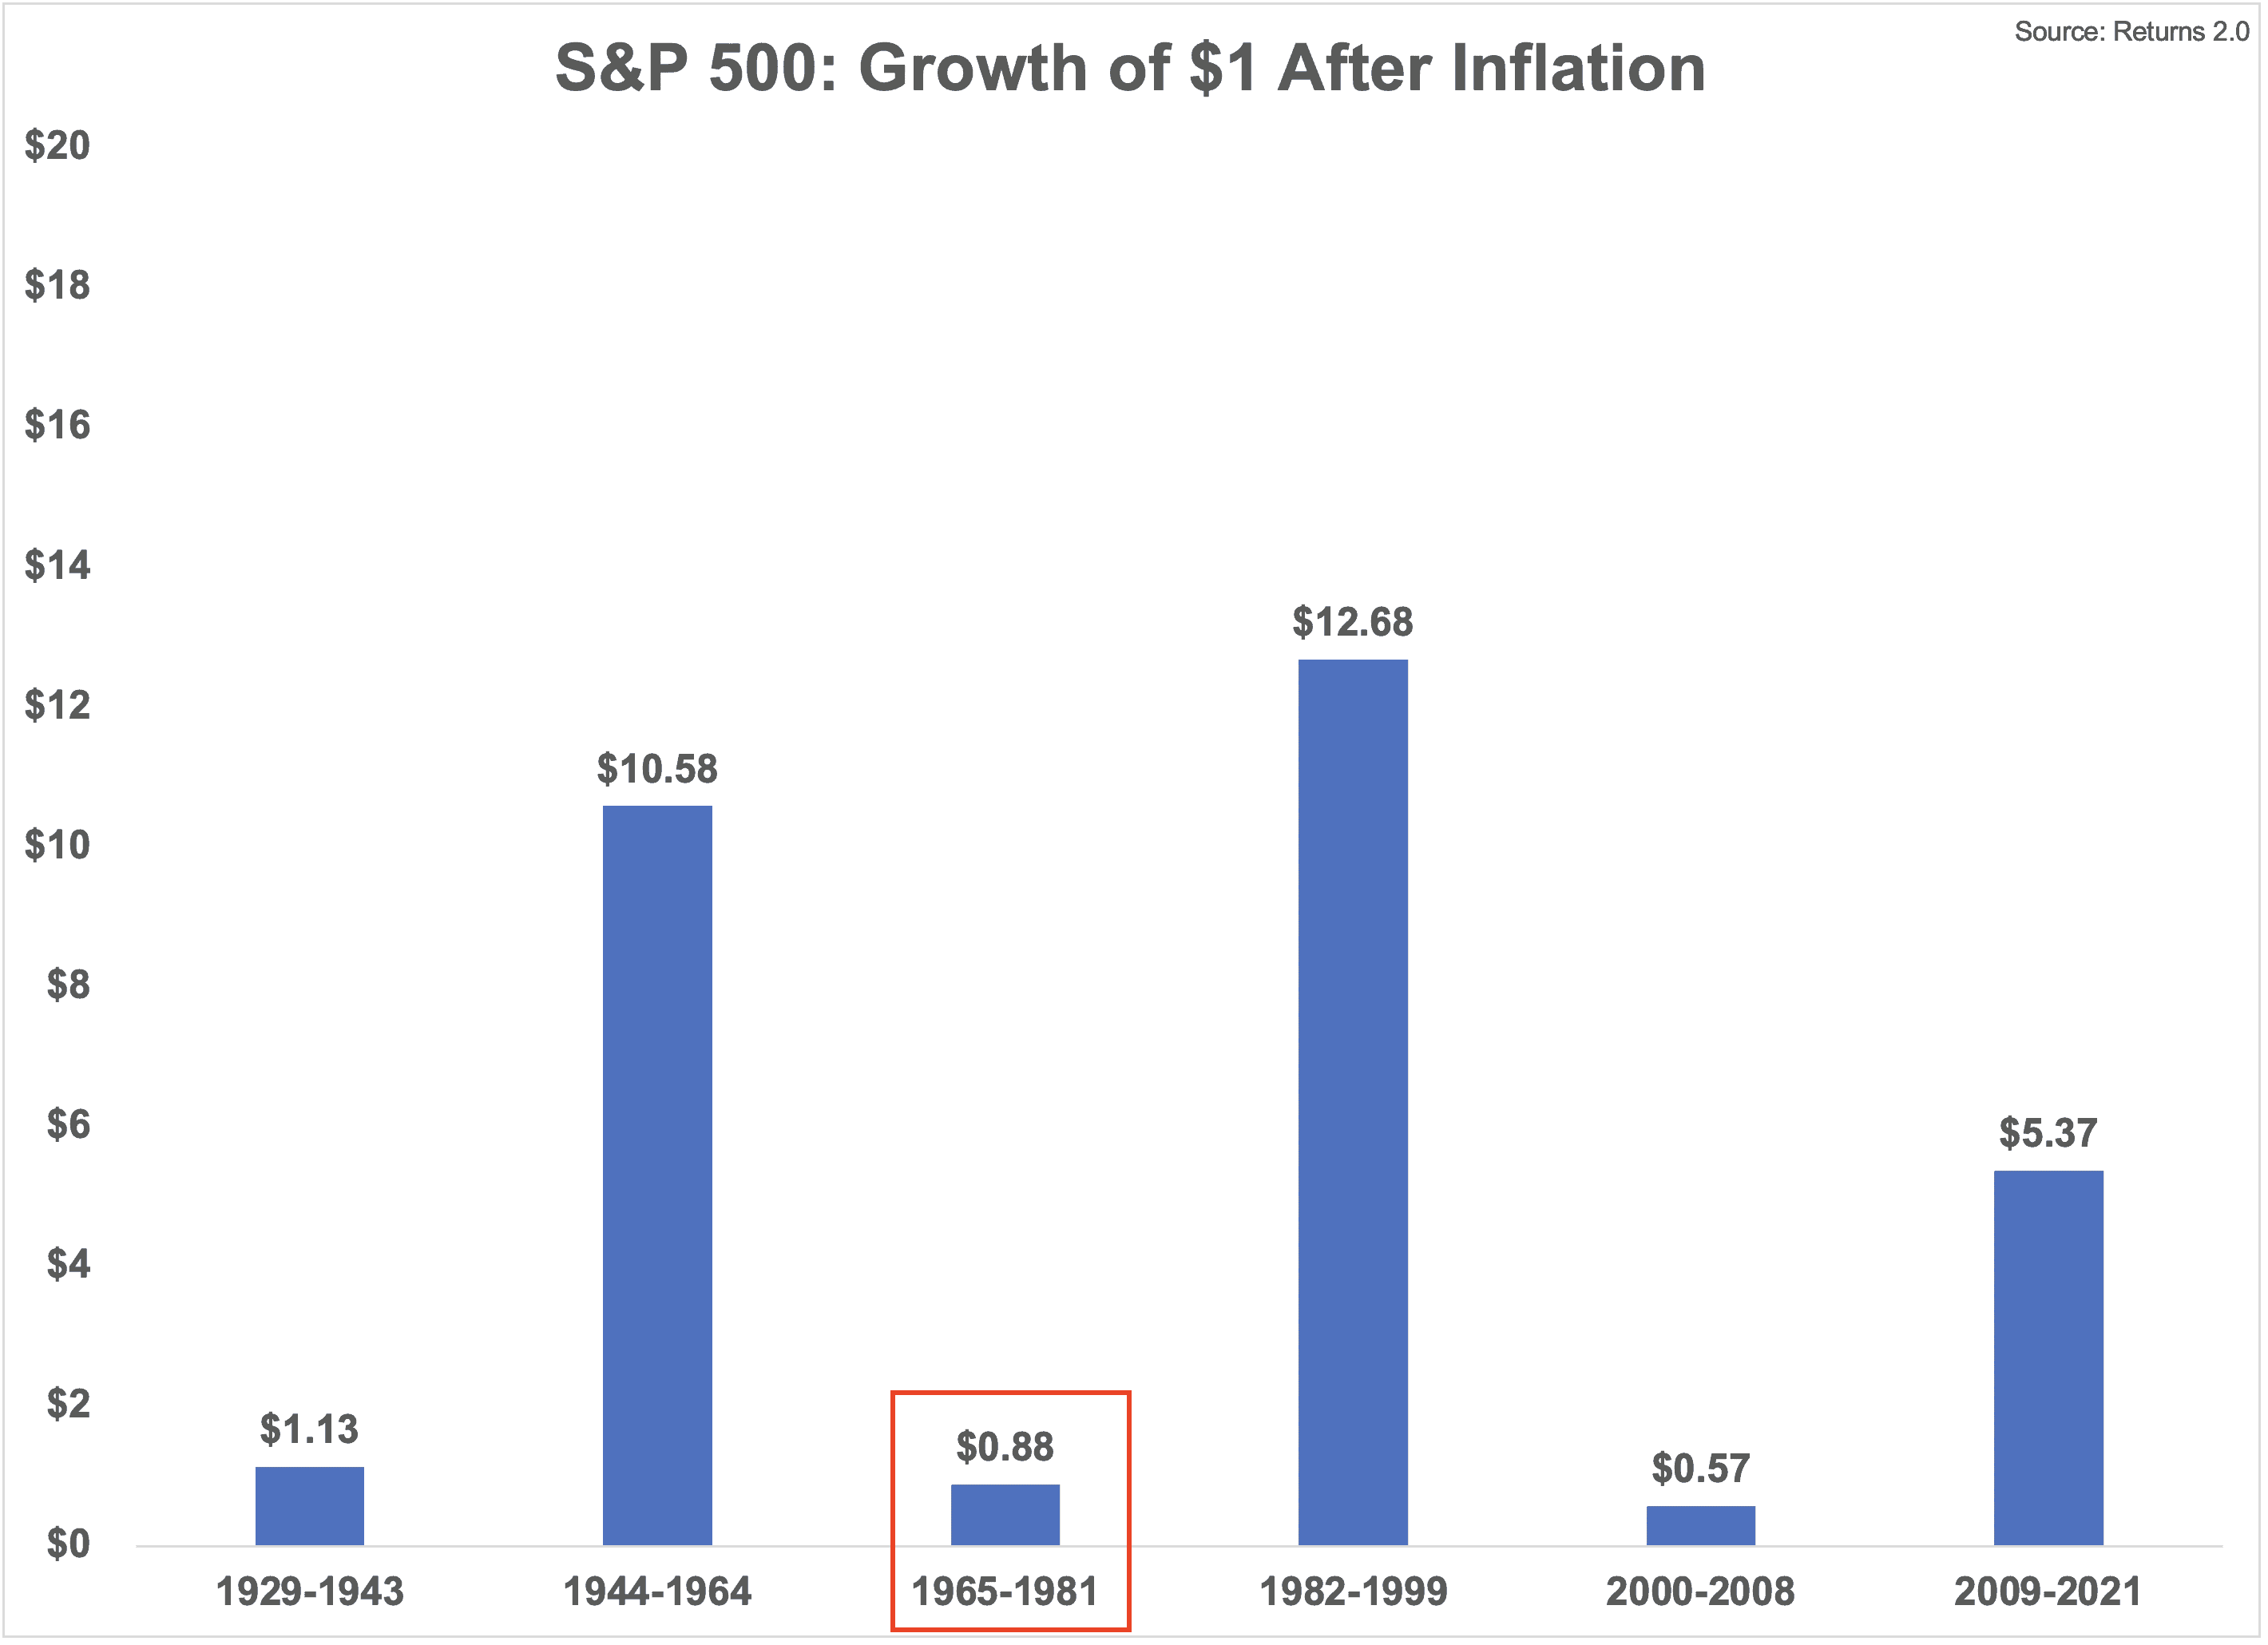 S&P 500 $1 growth after inflation for various time periods